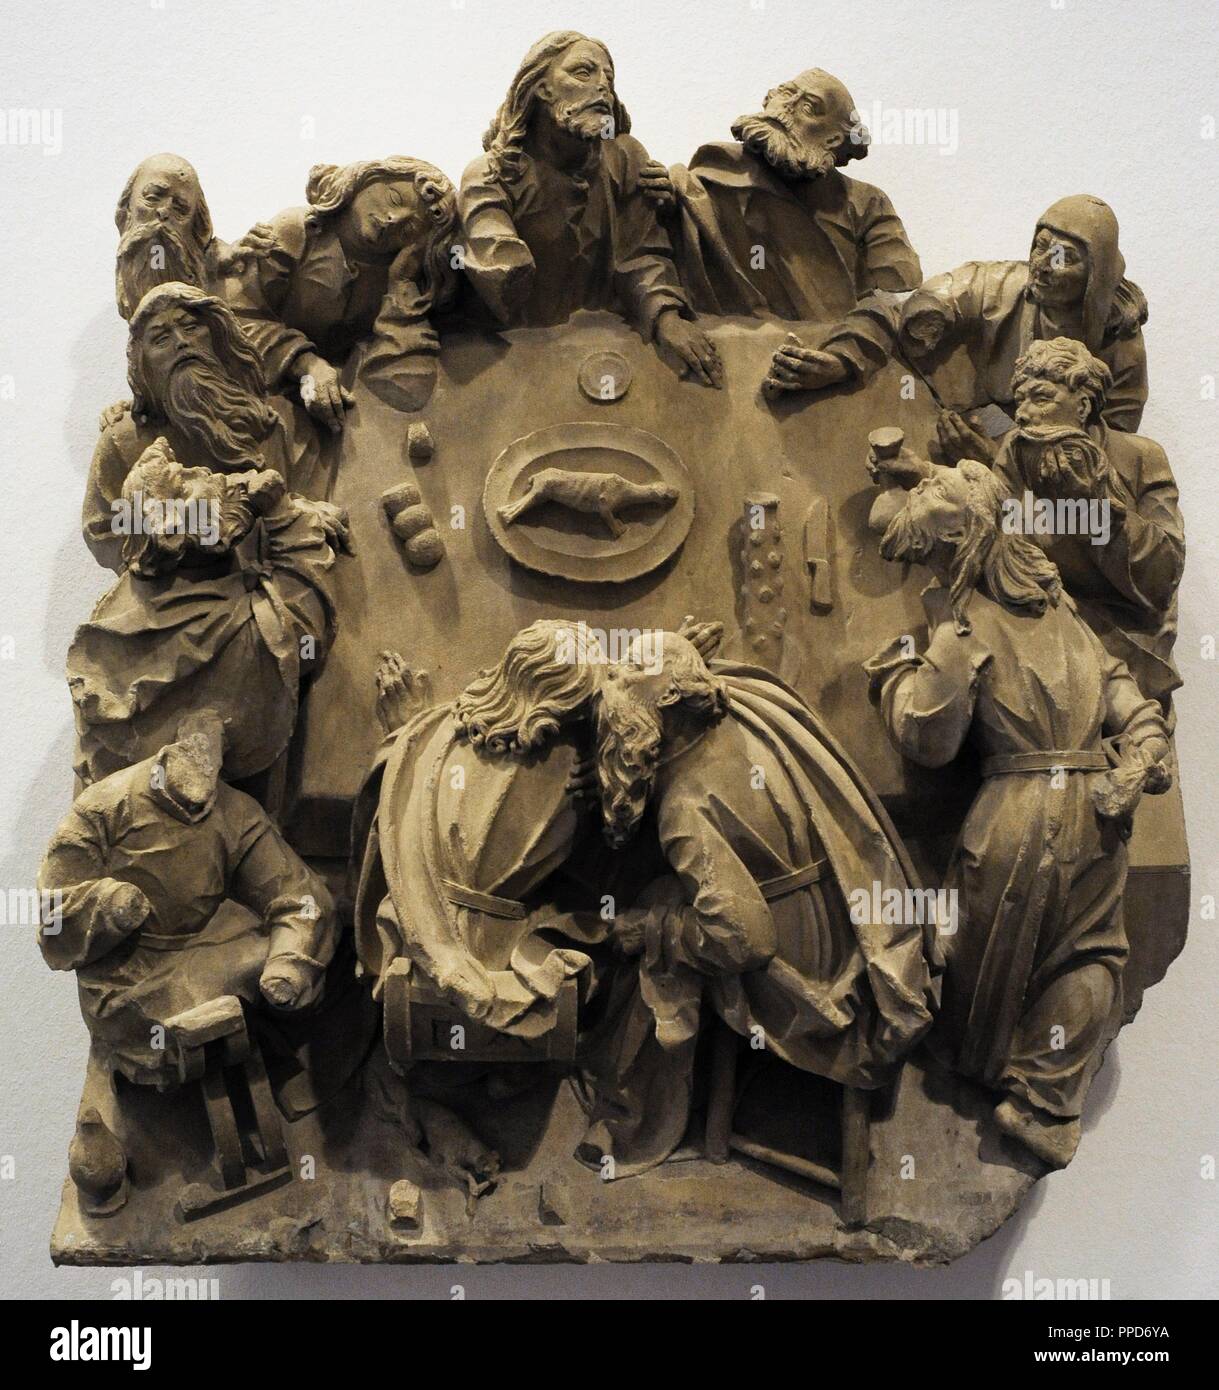 The Last Supper from the sacrament house of Cologne Cathedral, Germany. Cologne, c. 1510. Baumberg Sandstone. Schnu tgen Museum. Cologne, Germany. Stock Photo